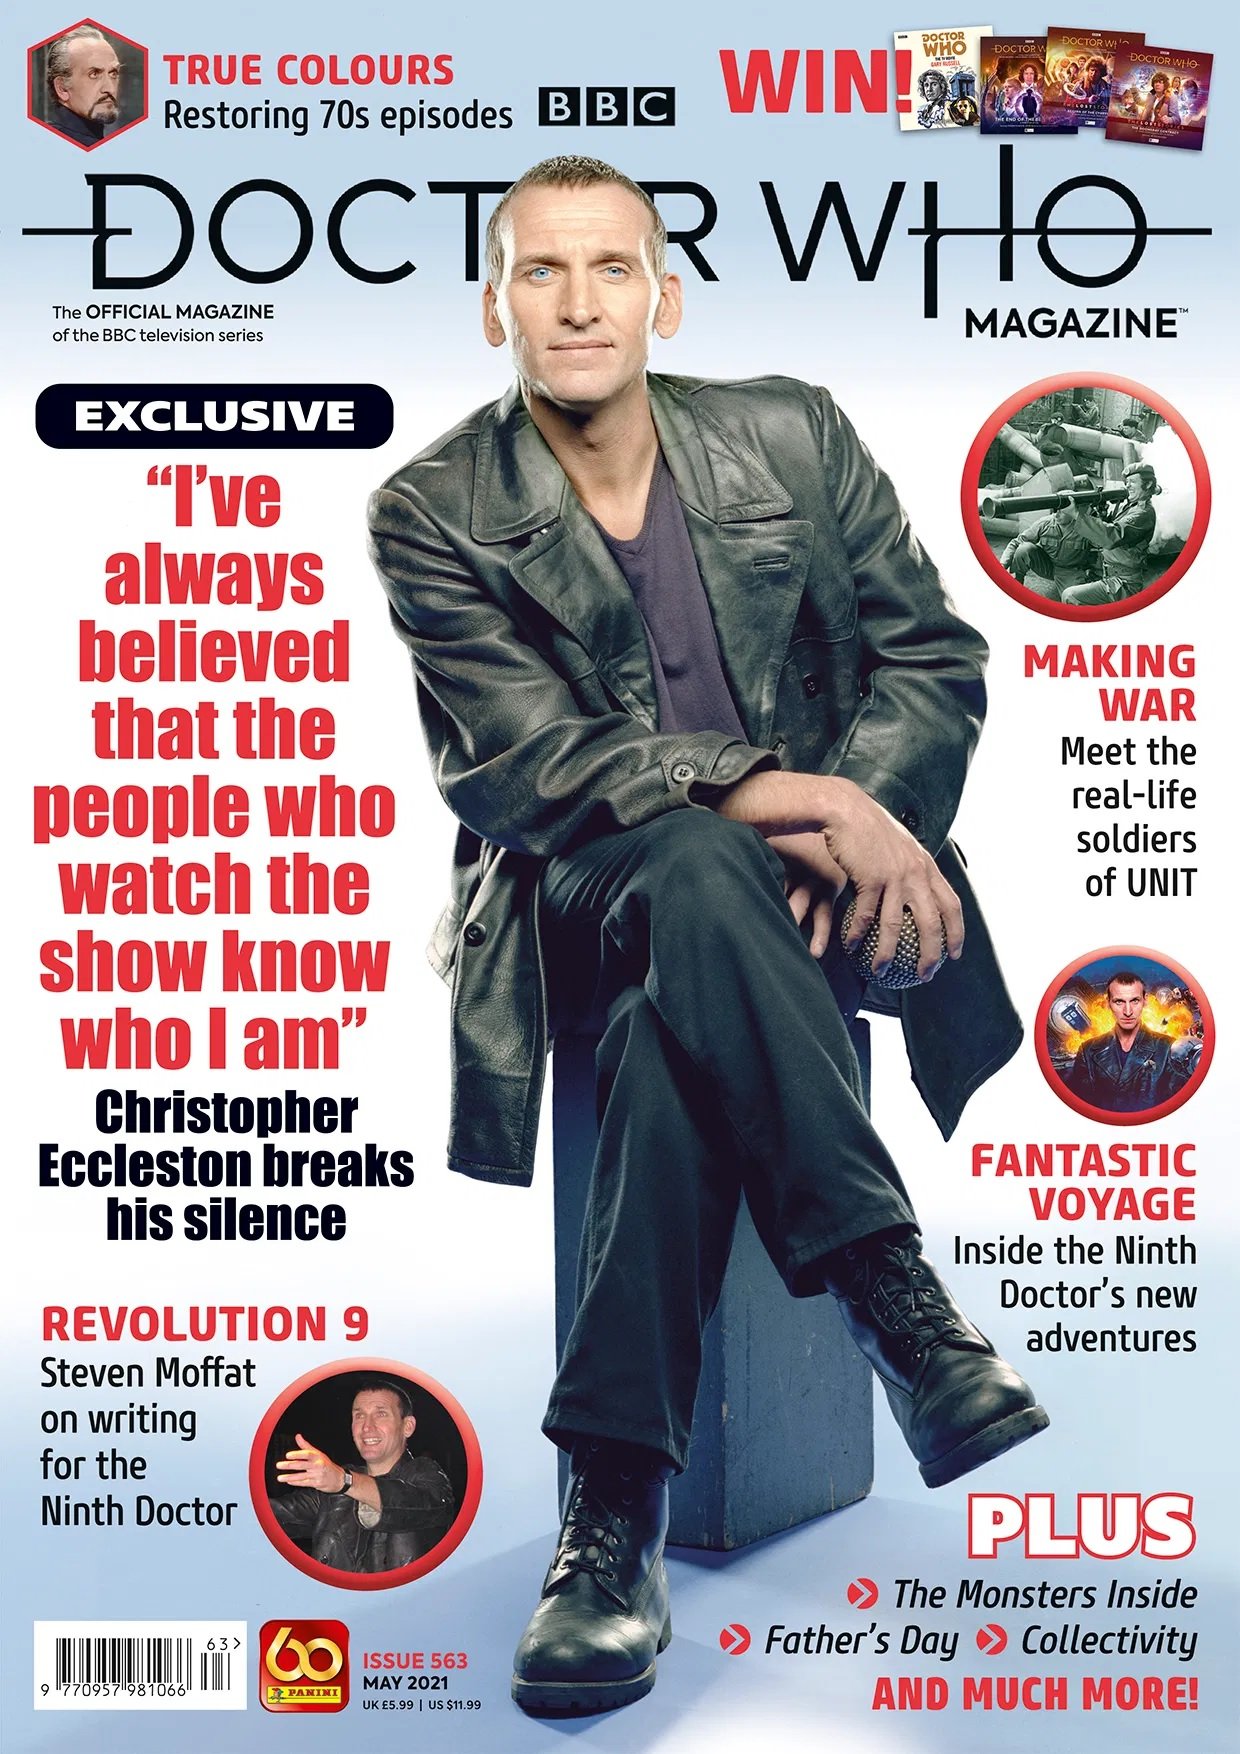 Out Now: Doctor Who Magazine 563 Includes An Exclusive Interview with Christopher Eccleston